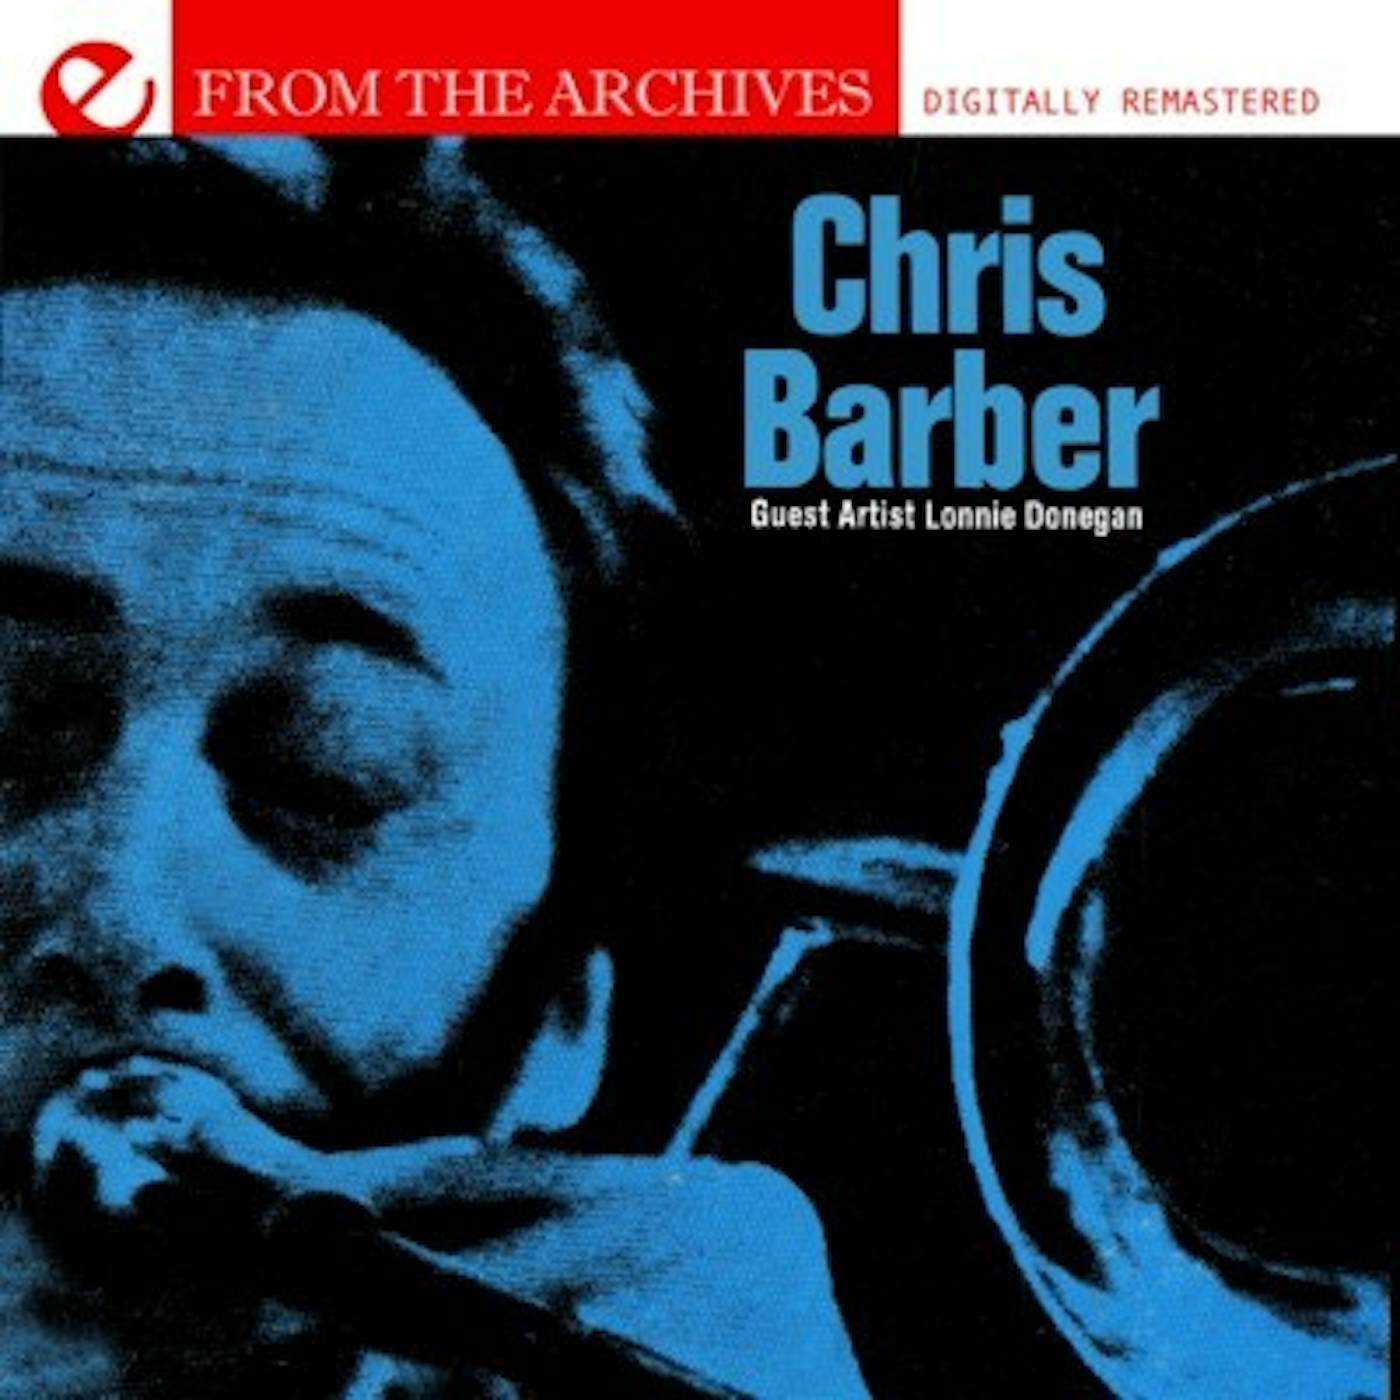 Chris Barber MERRYDOWN BLUES: FROM ARCHIVES CD